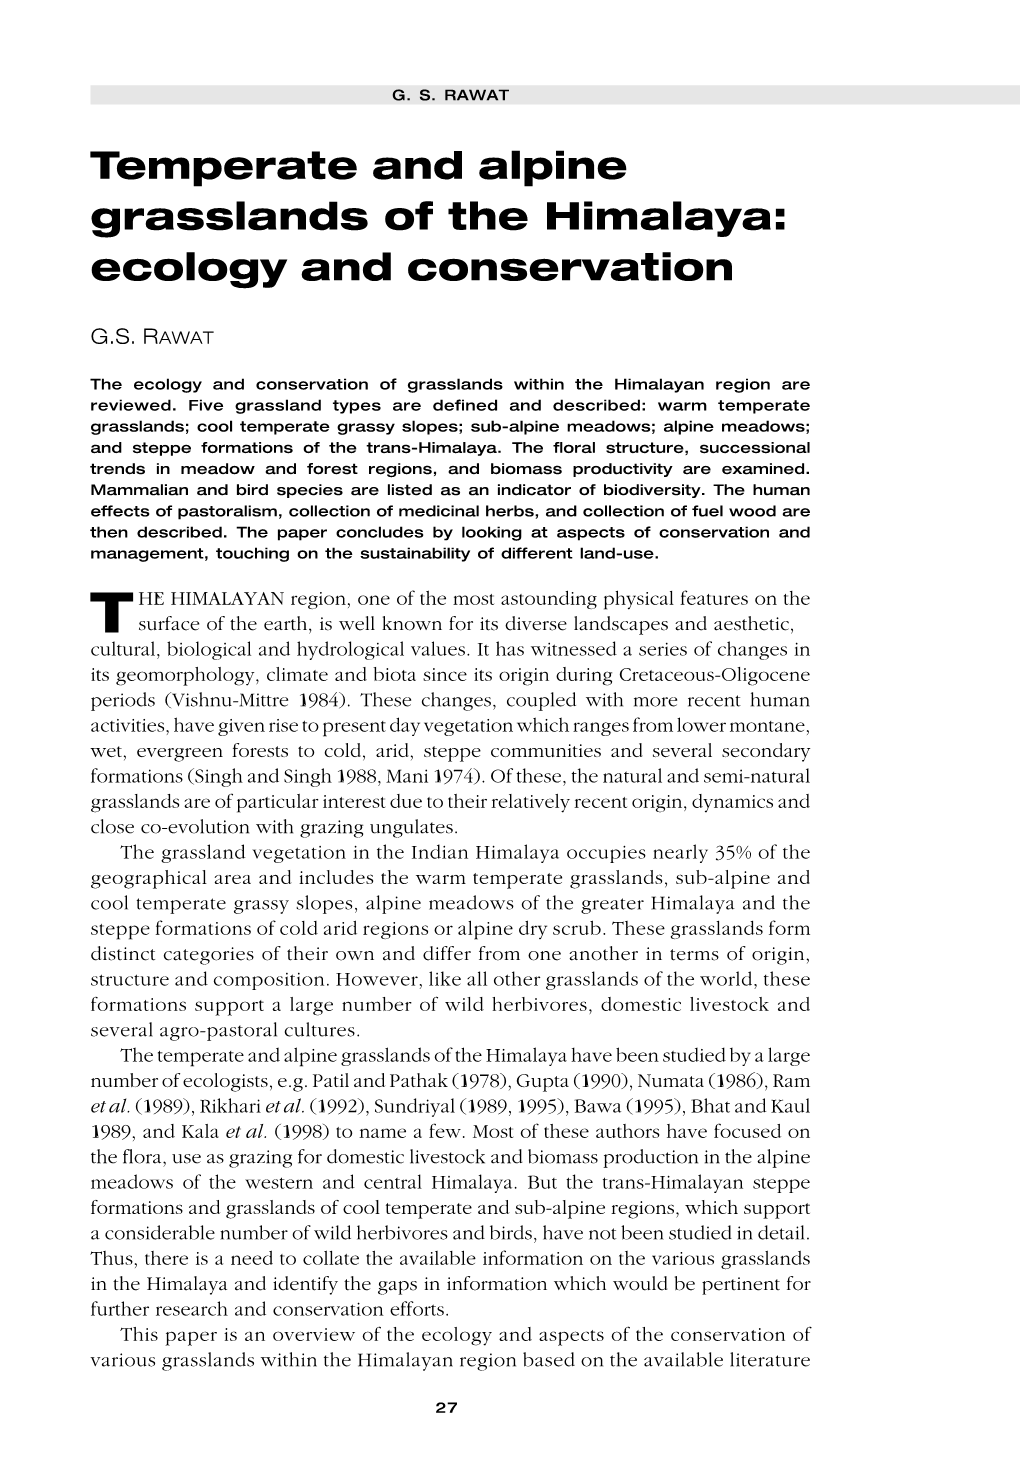 Temperate and Alpine Grasslands of the Himalaya: Ecology and Conservation